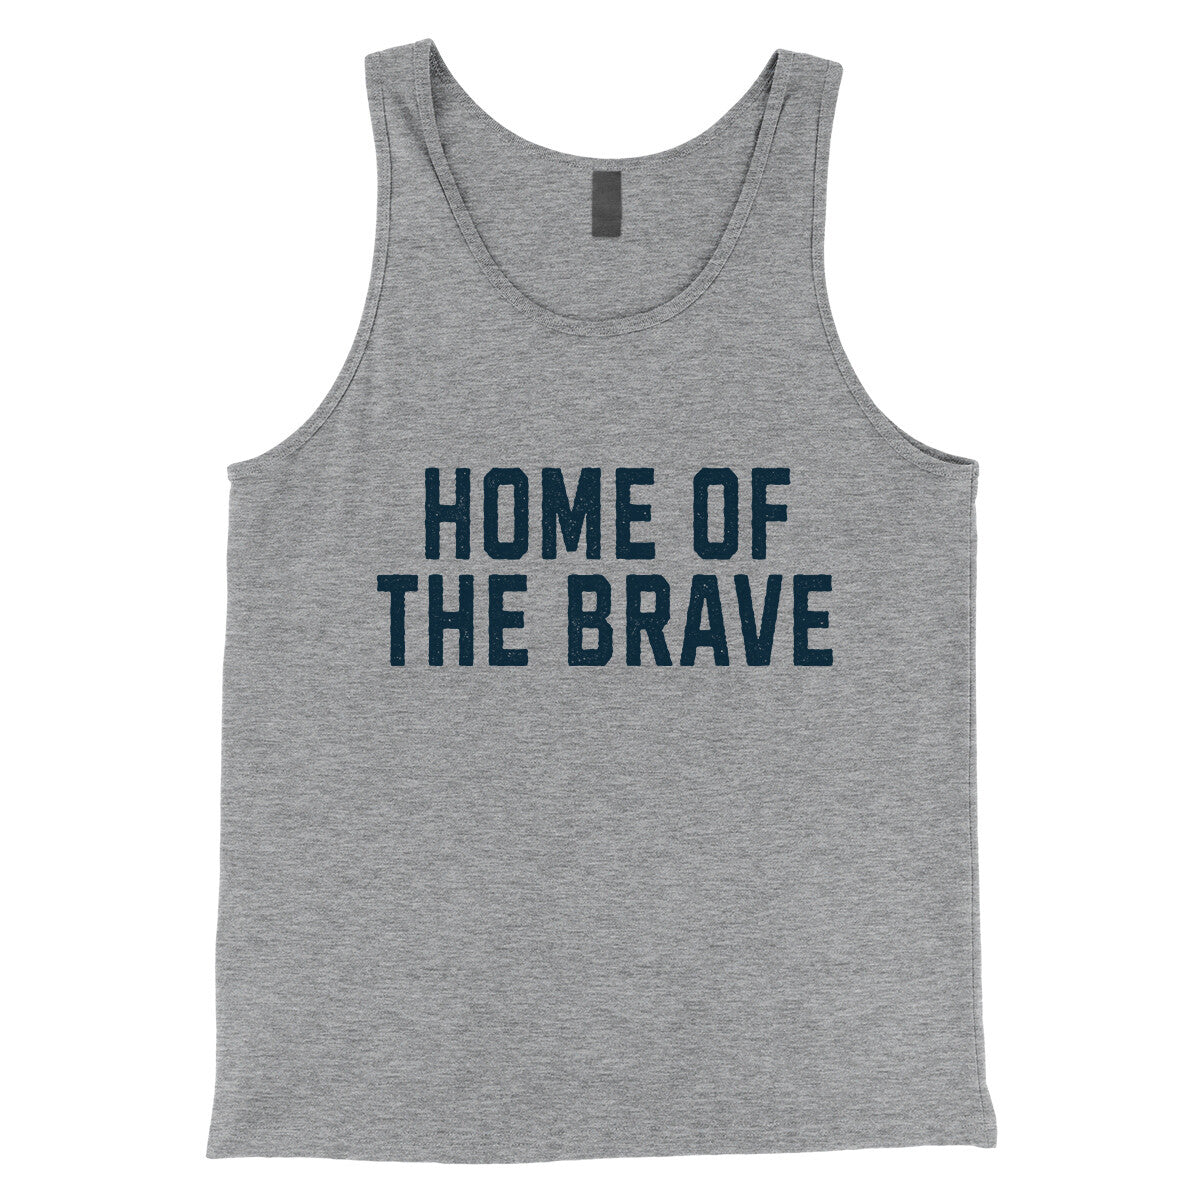 Home of the Brave in Athletic Heather Color